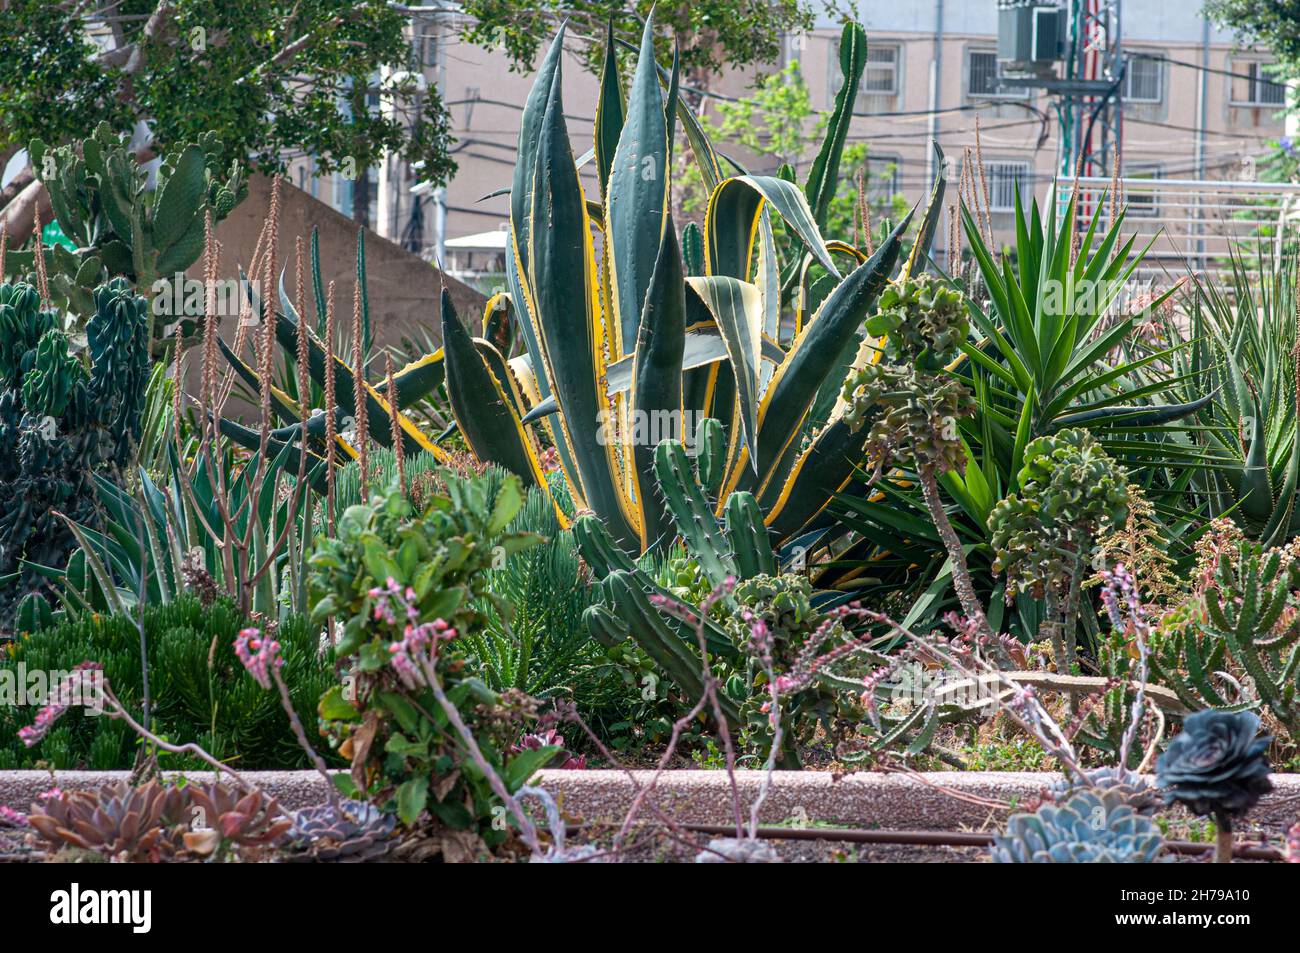 Sansevieria trifasciata in a Cactus and succulent garden Photographed in Tel Aviv, Israel in May Stock Photo